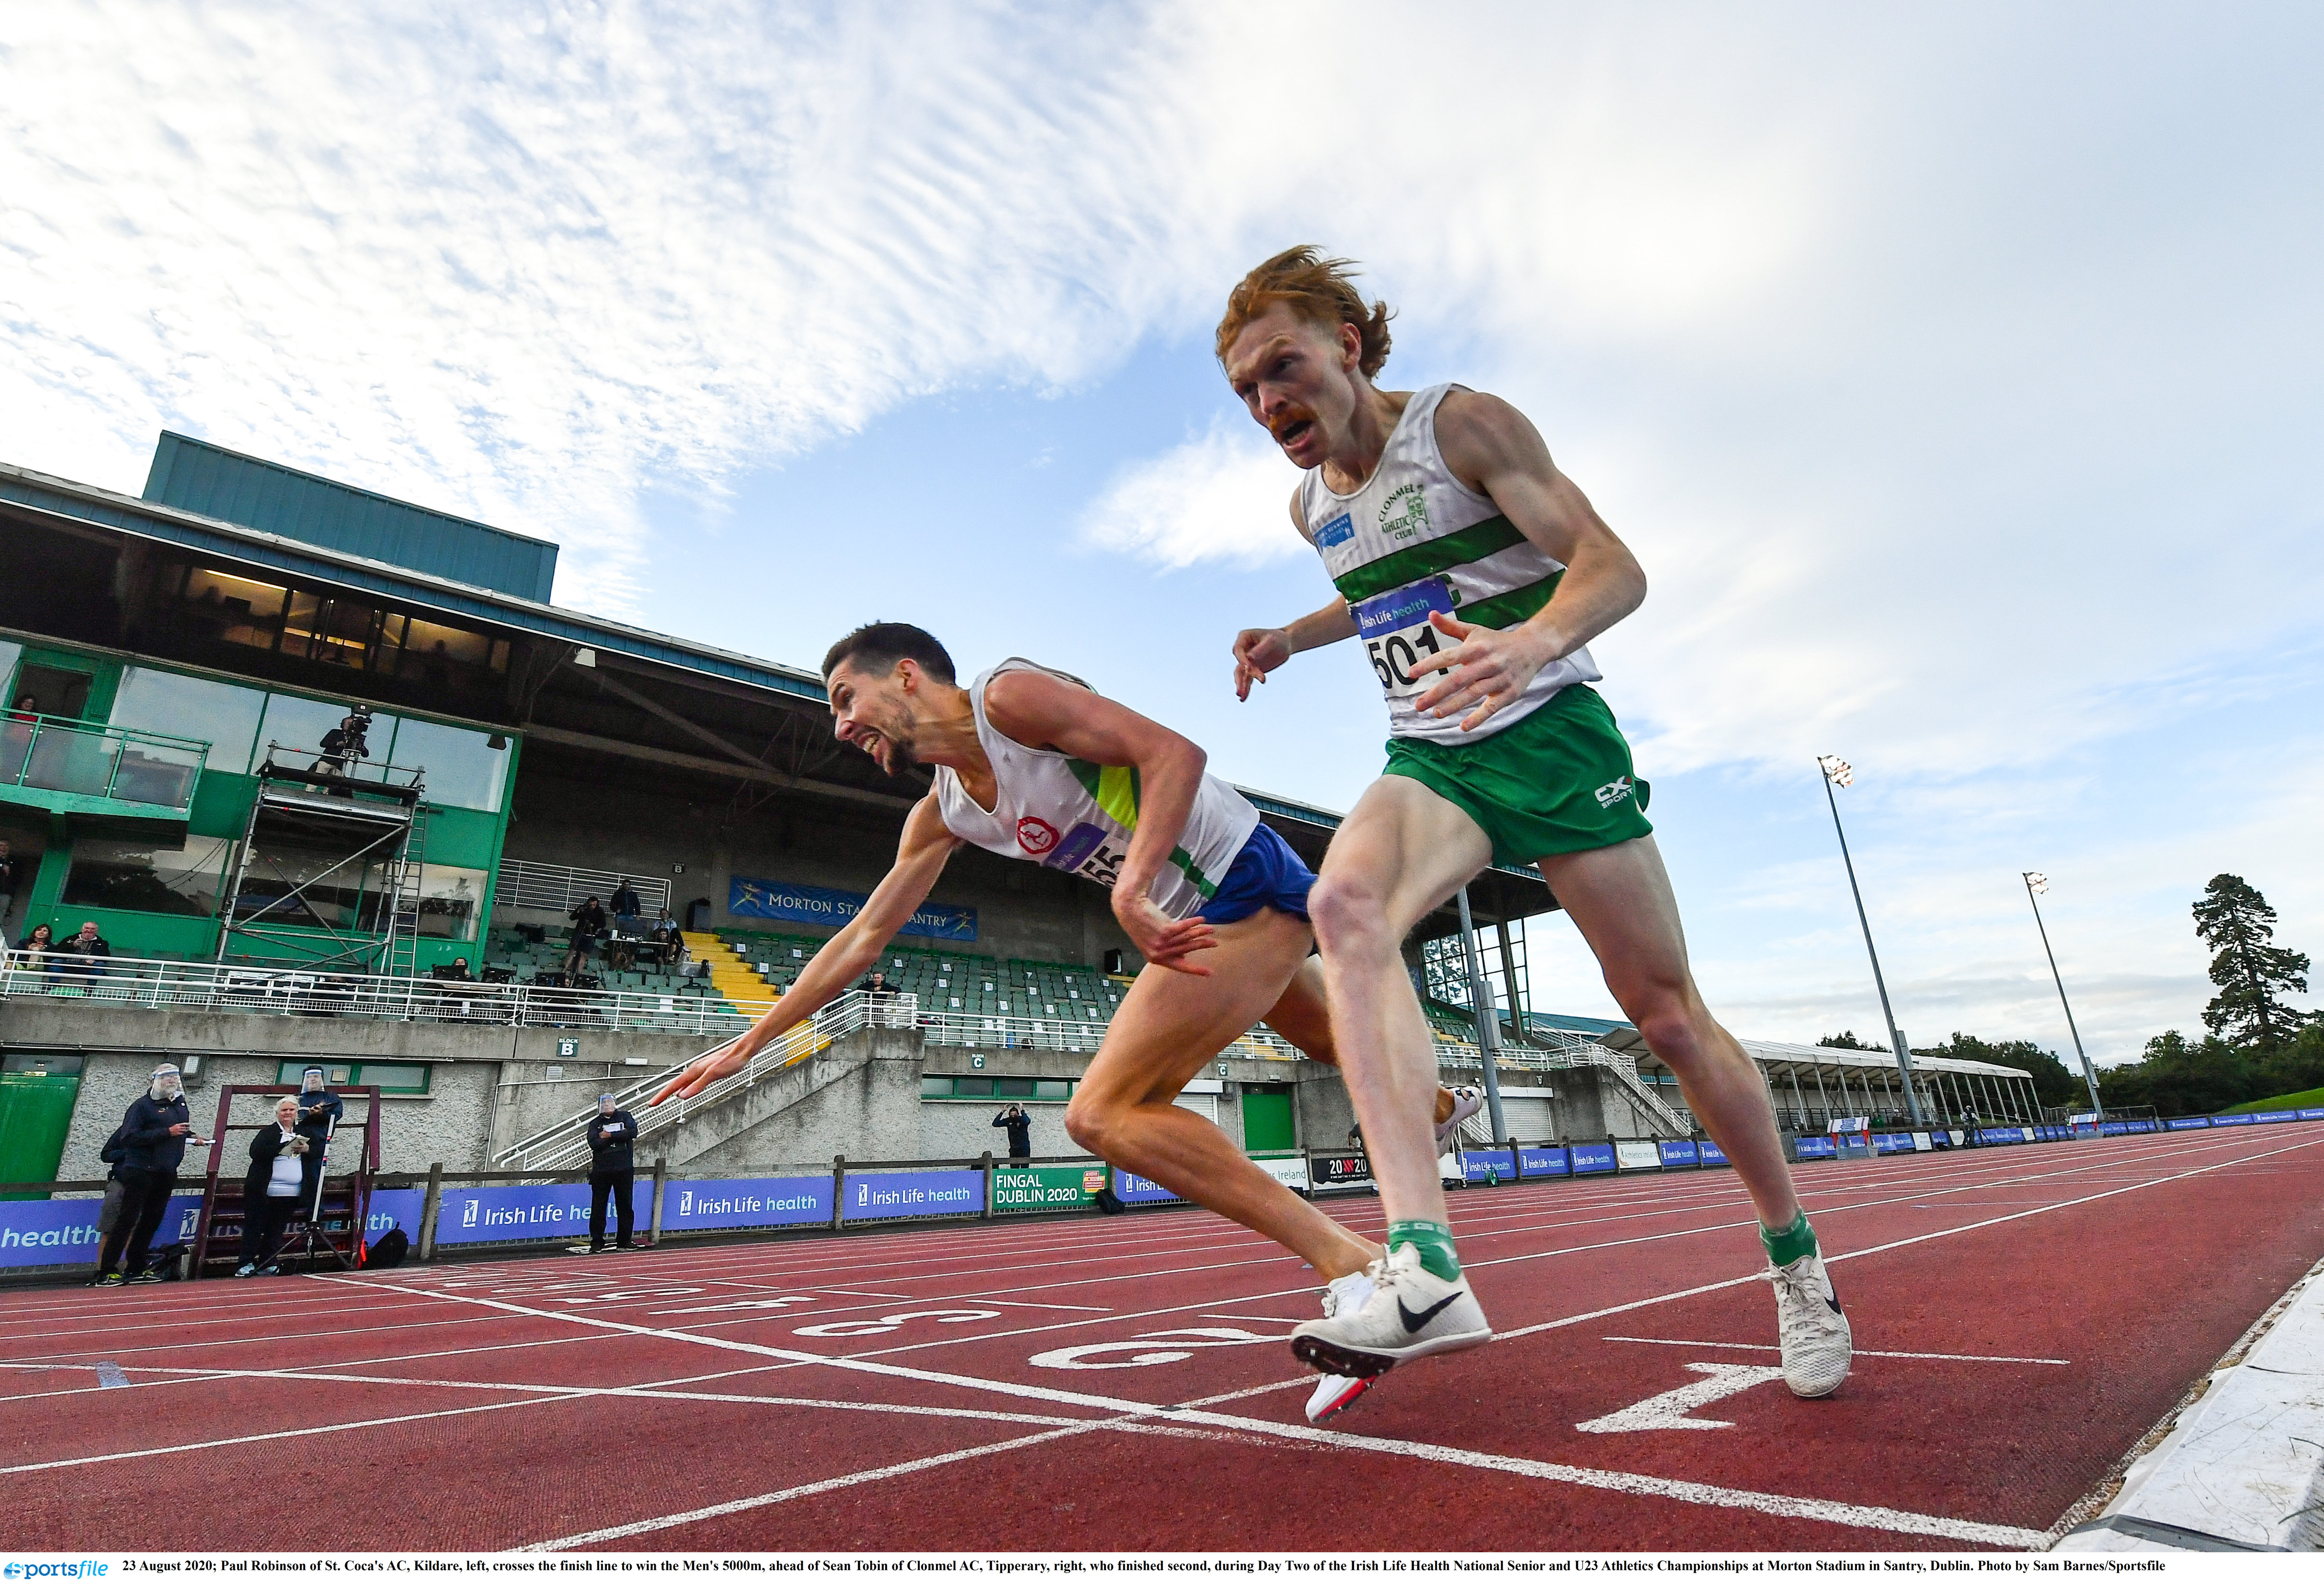 Robinson’s Return: thrilling 1500m highlights excellent nationals